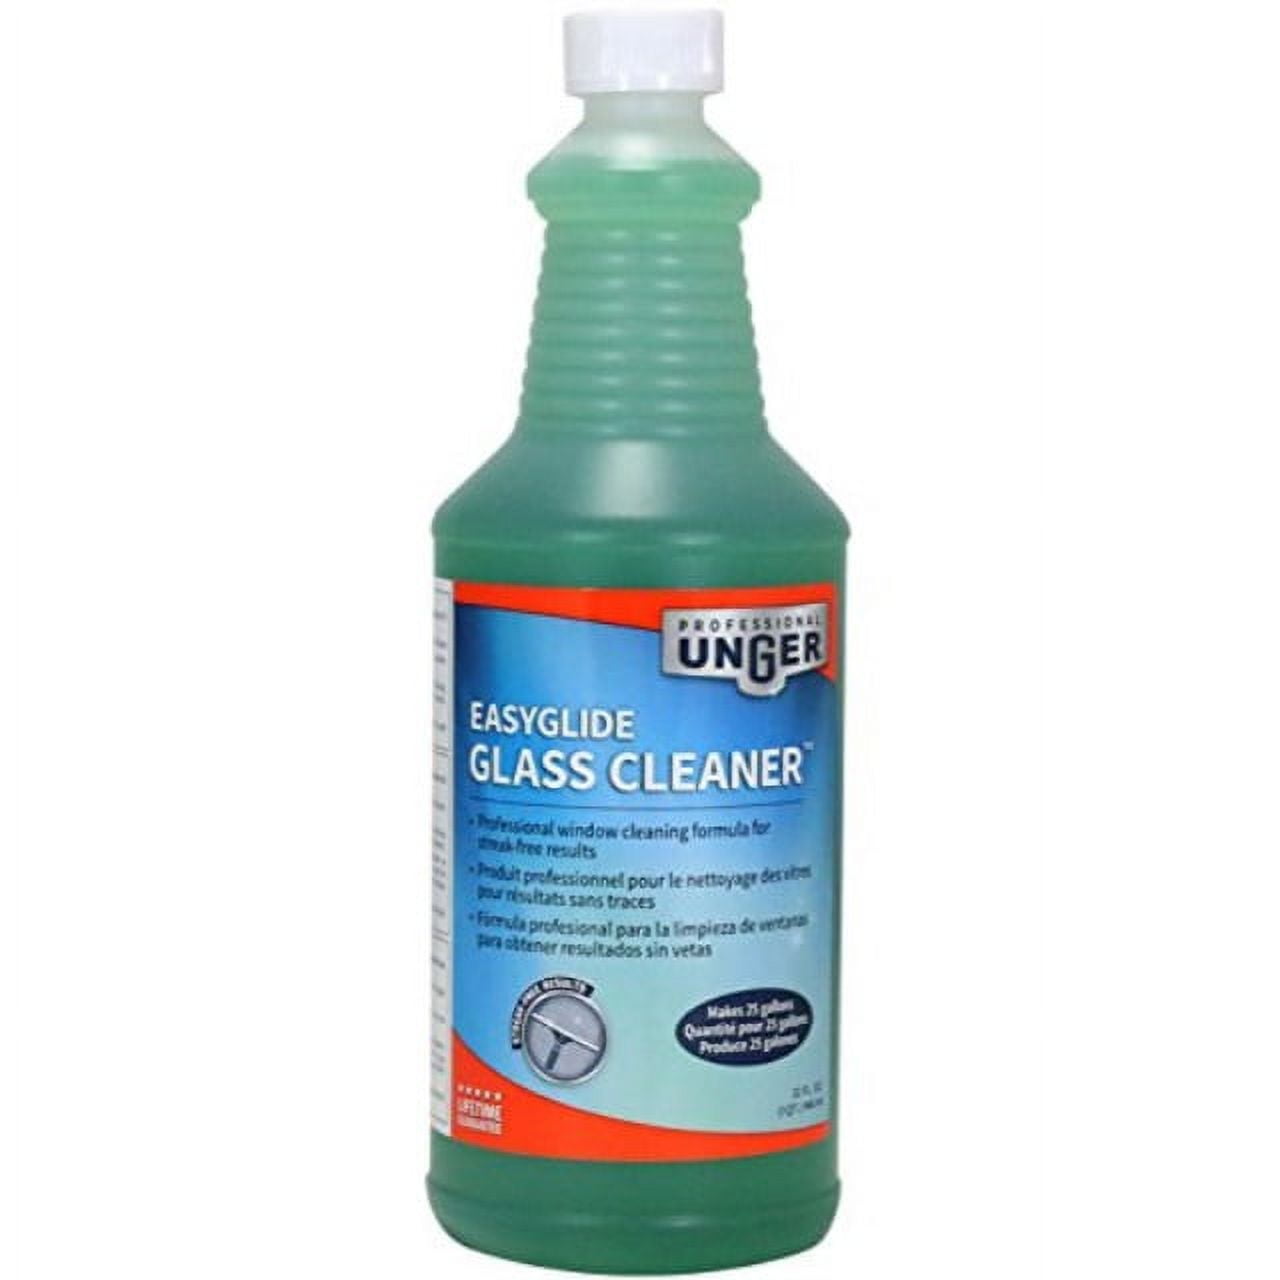 Brillianize® 1-Gallon Acrylic & Glass Cleaner & Polish, Cleaners, Cleaning Supplies & Equipment, Exhibit & Display